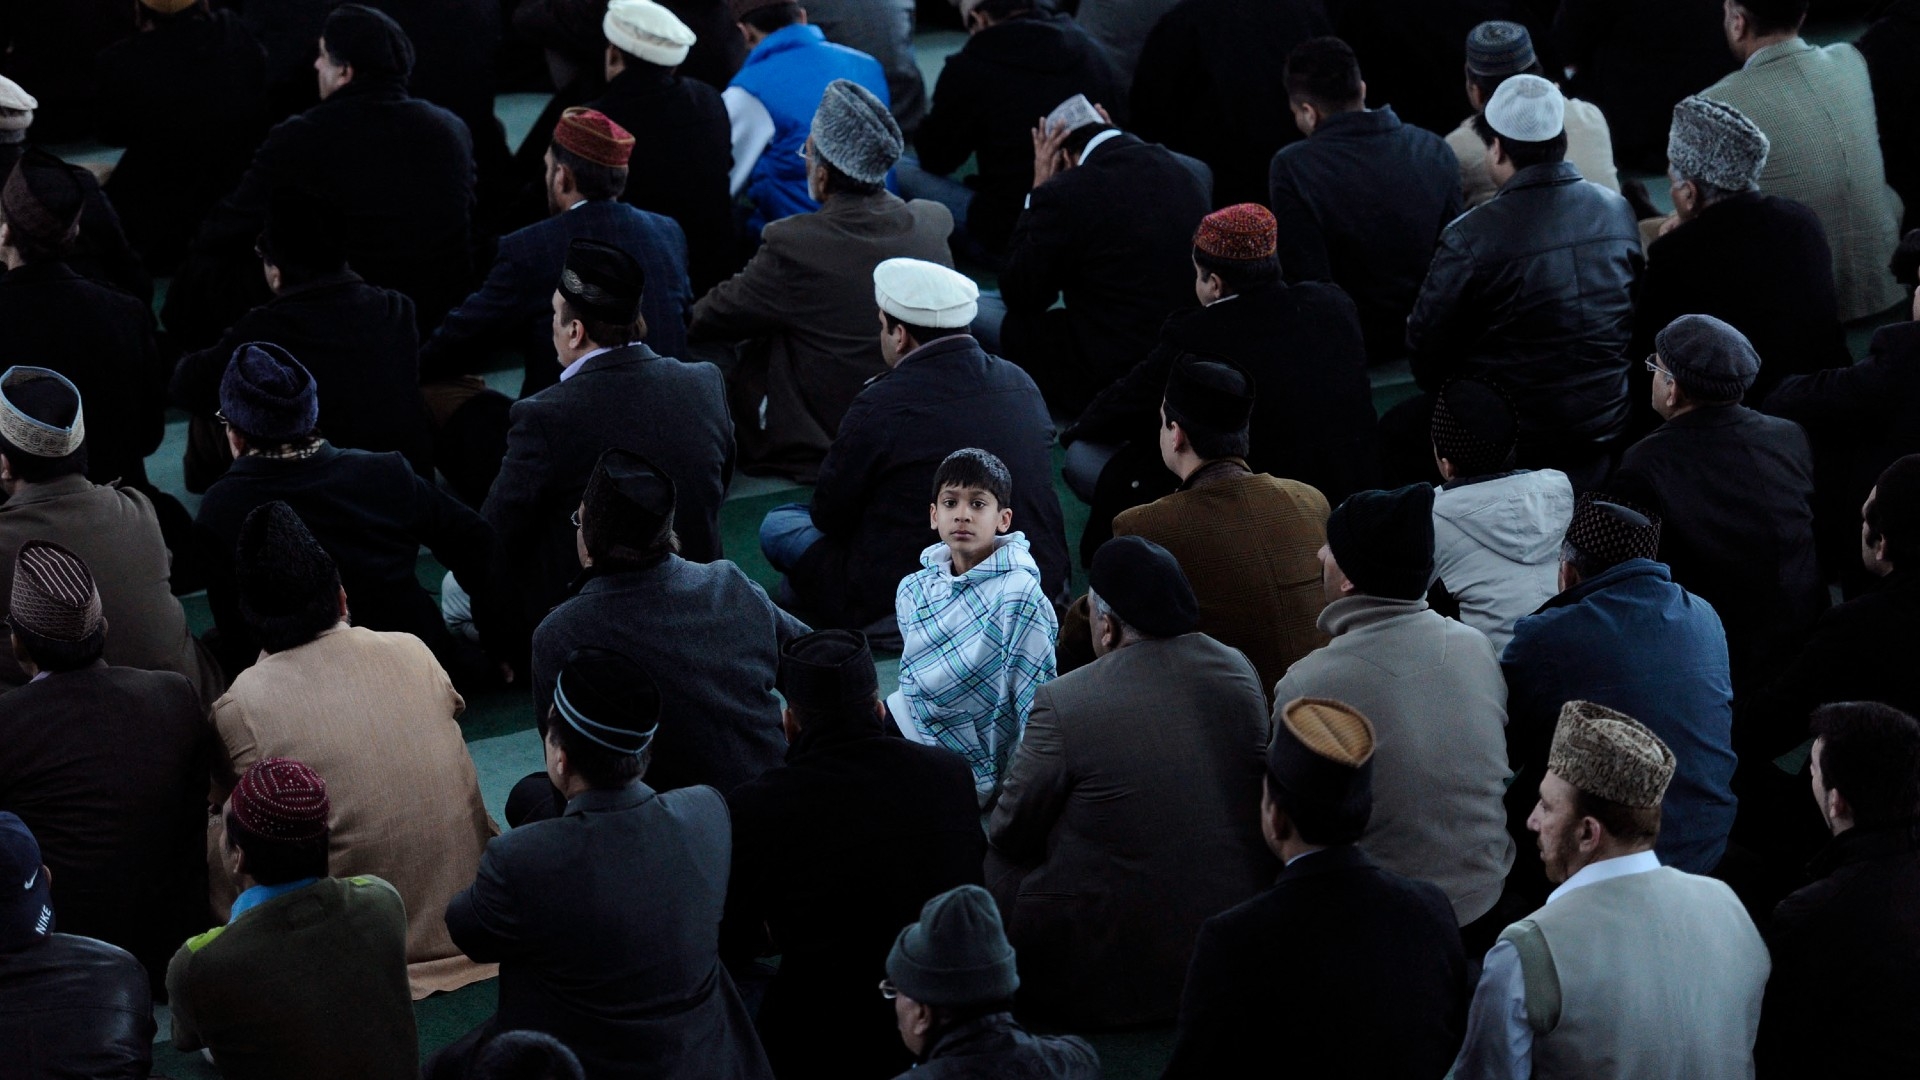 Muslims gather for Friday prayers in Baitul Futuh Mosque in south London (AFP/File photo)